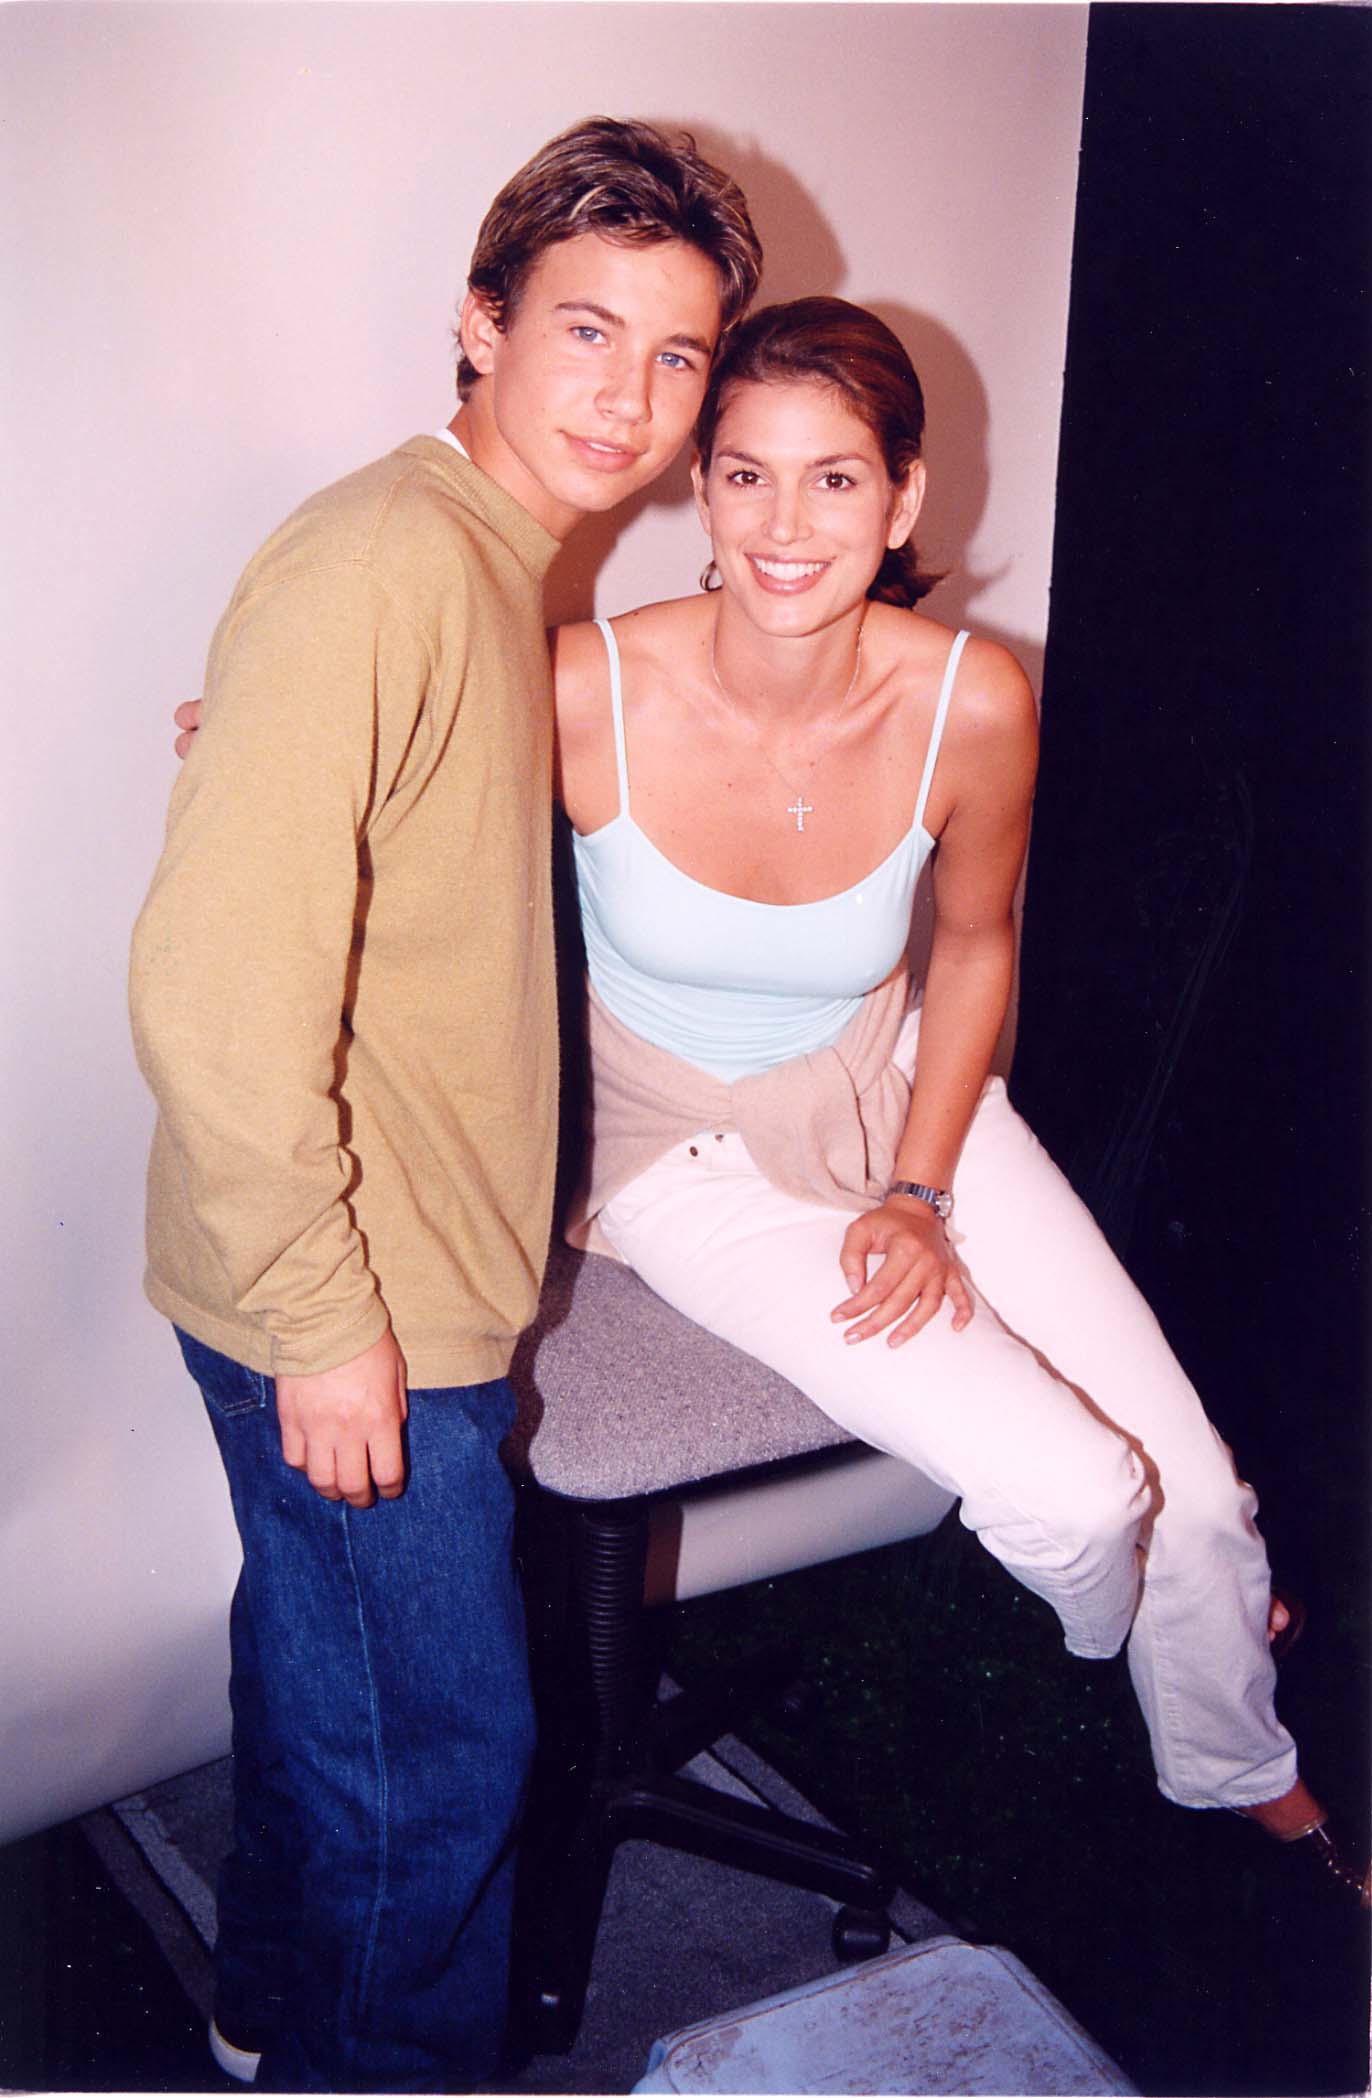 Jonathan Taylor Thomas & Cindy Crawford at the 1997 benefit for the Pediatric AIDS foundation in Beverly Hills. | Source: Getty Images